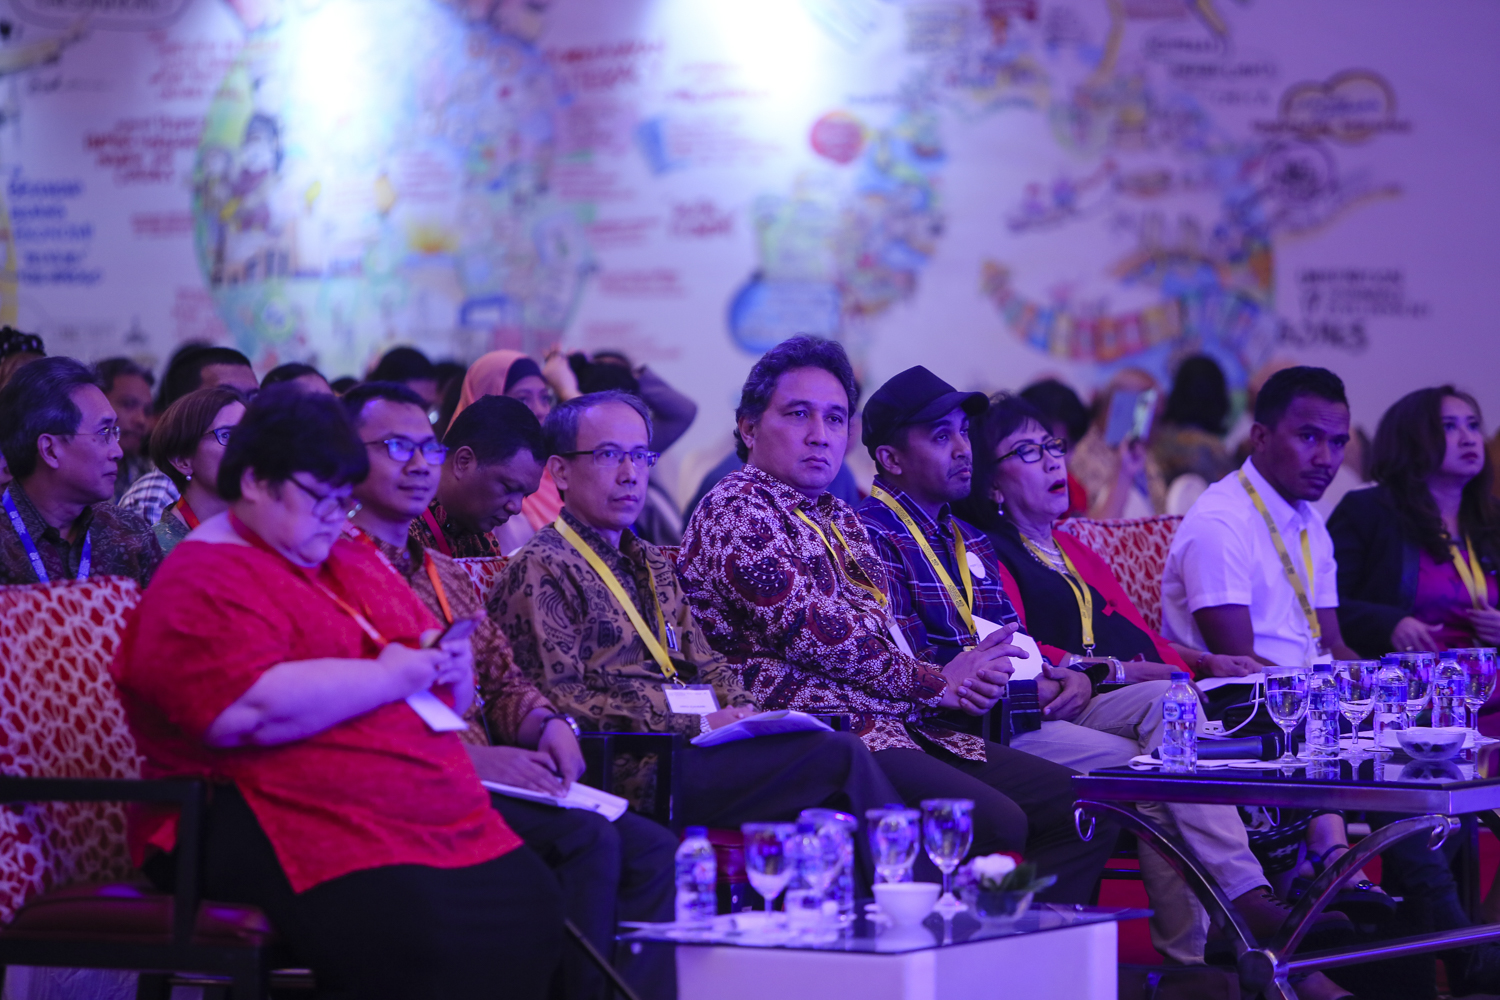 Special Session I: Reducing Disparity by Optimisisng The Role of Culure in Eastern Indonesia